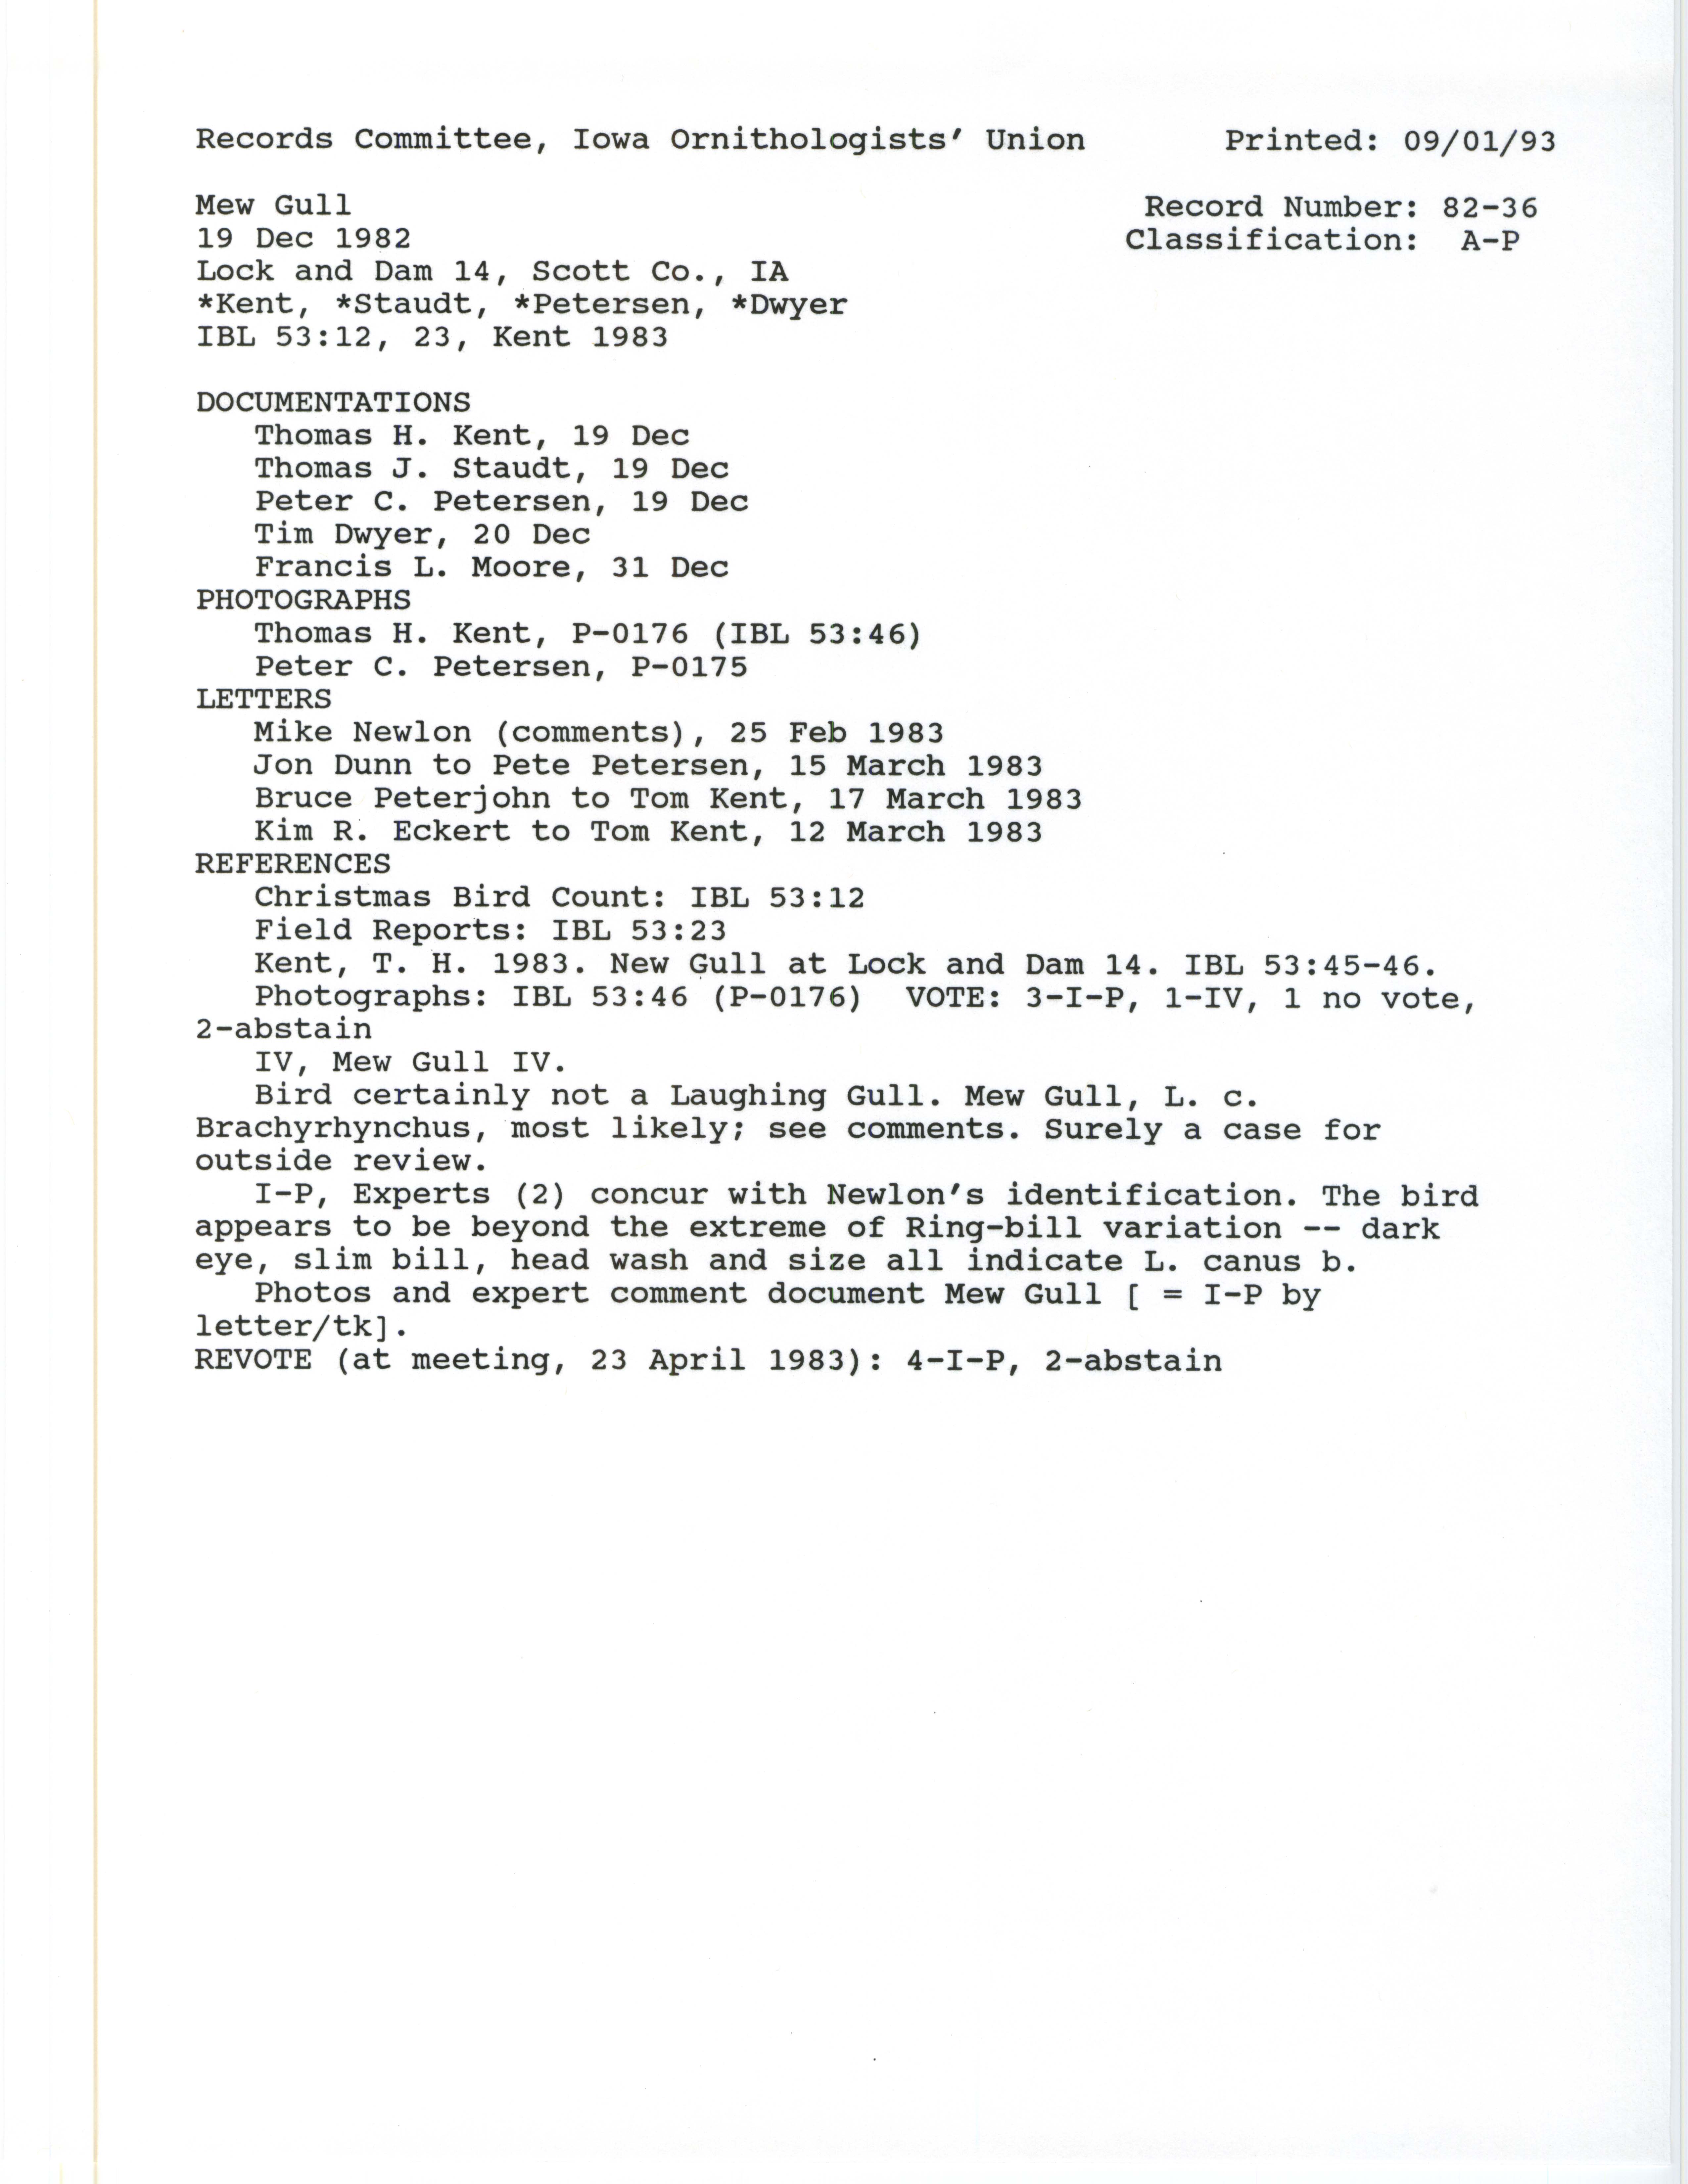 Records Committee review for rare bird sighting of Mew Gull at Lock and Dam 14, 1982